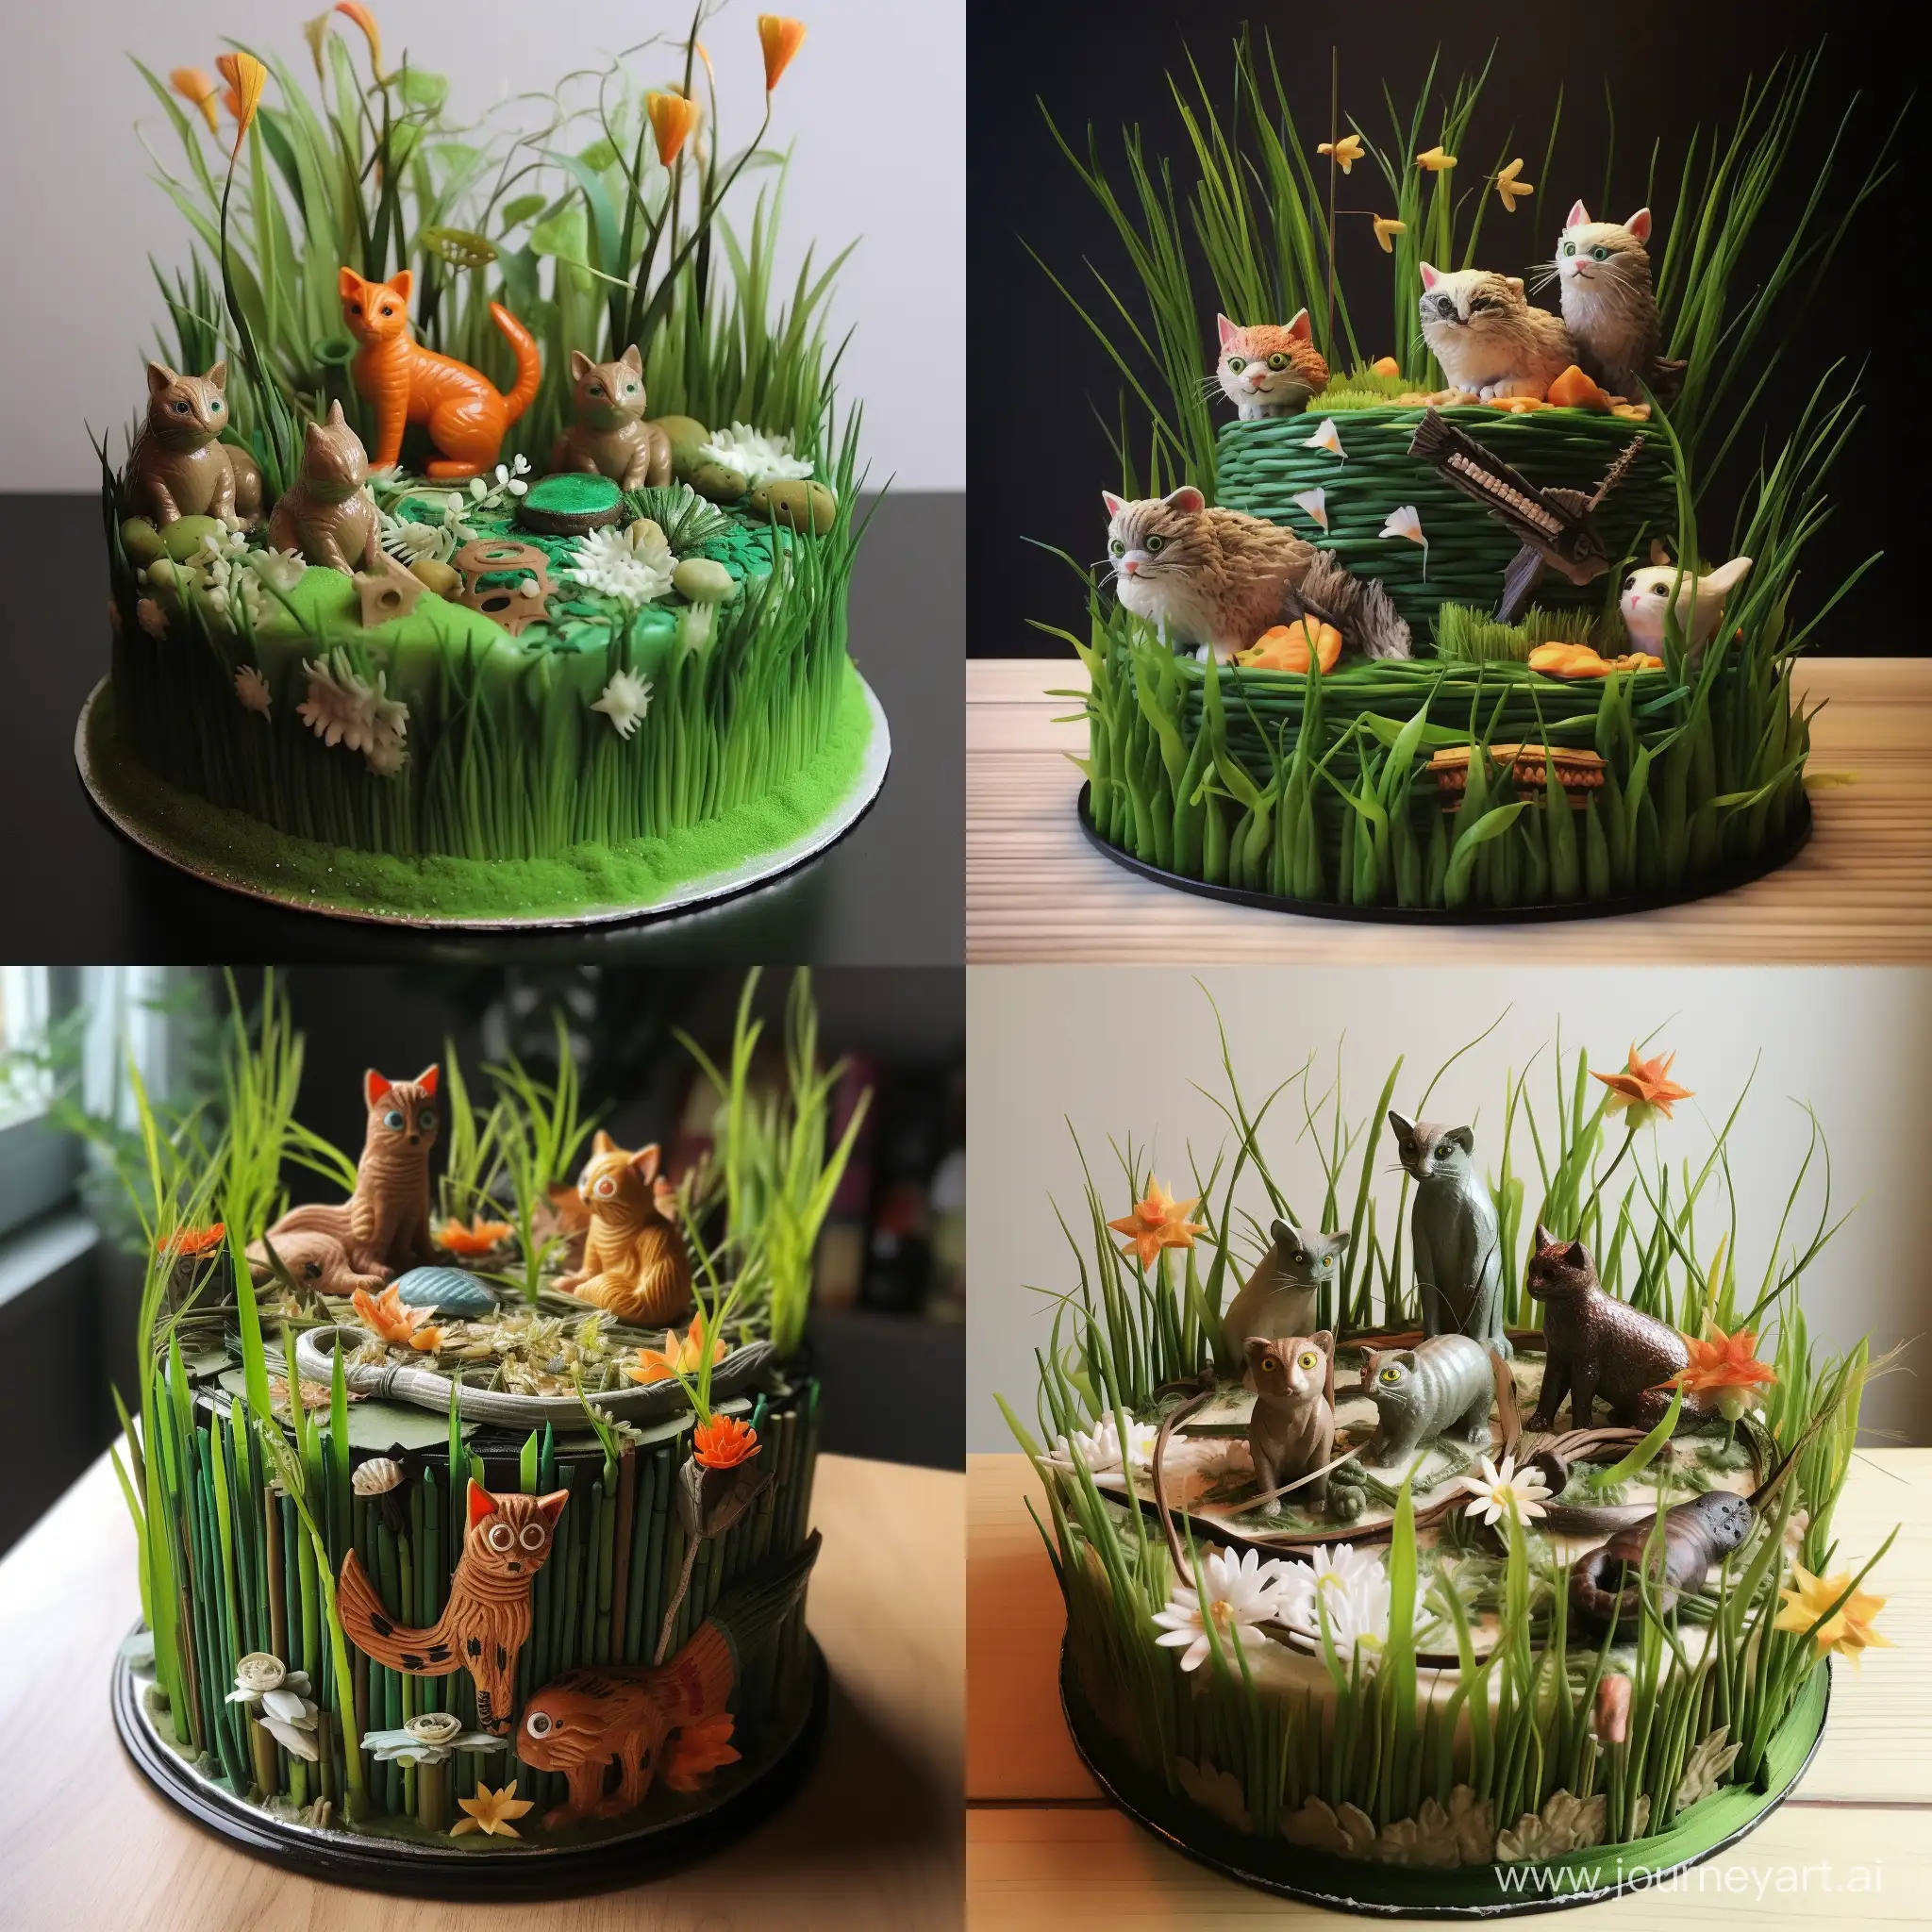 Cake with tinned fish, meat or chicken, lizards and rats as decoration some cat grass.